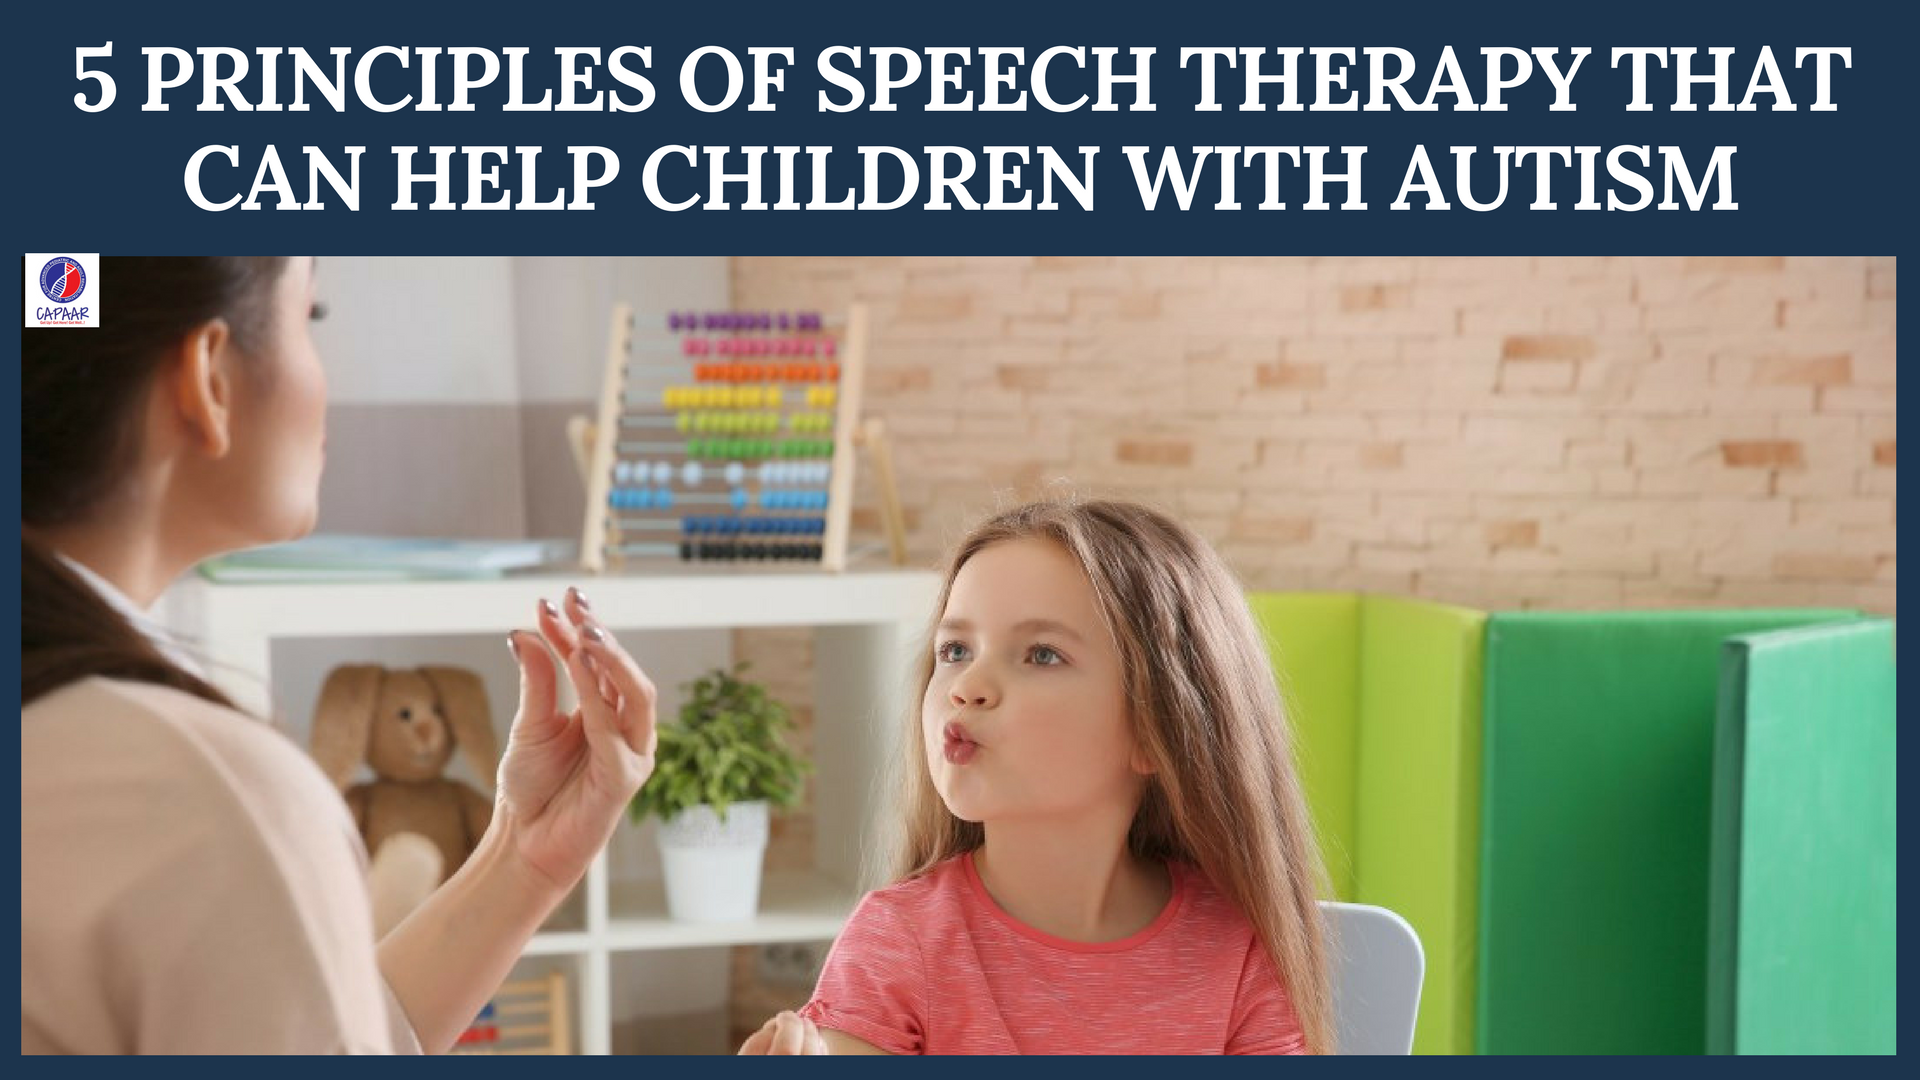 5 Principles of Speech Therapy That Can Help Children With Autism